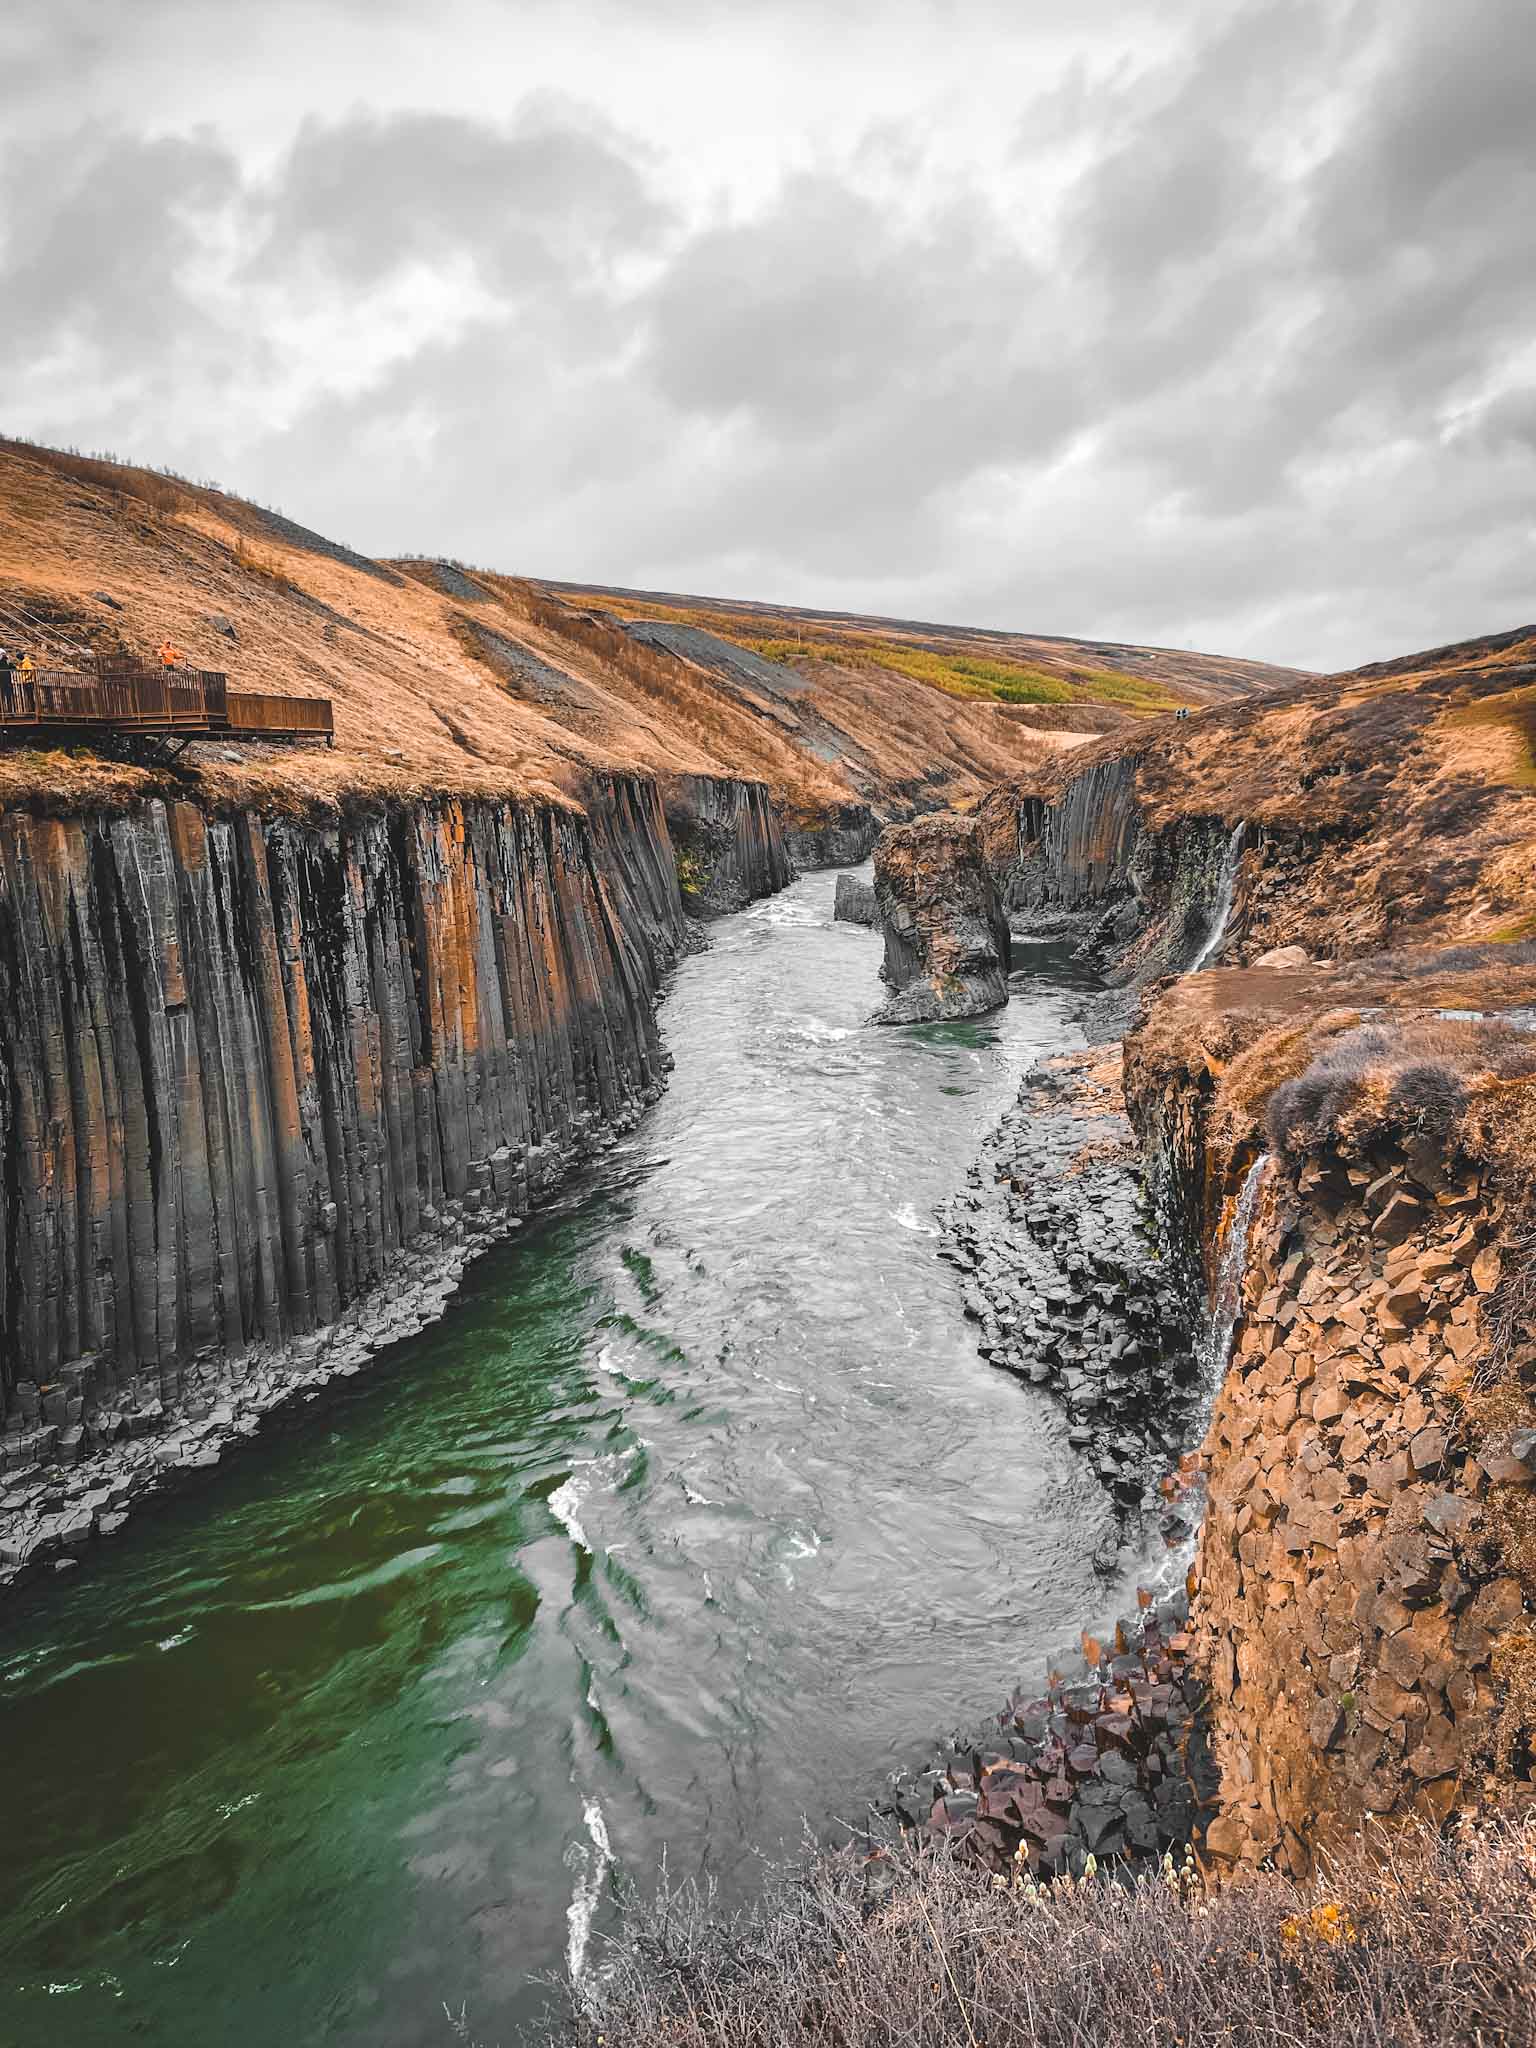 Studlagil canyon in Iceland